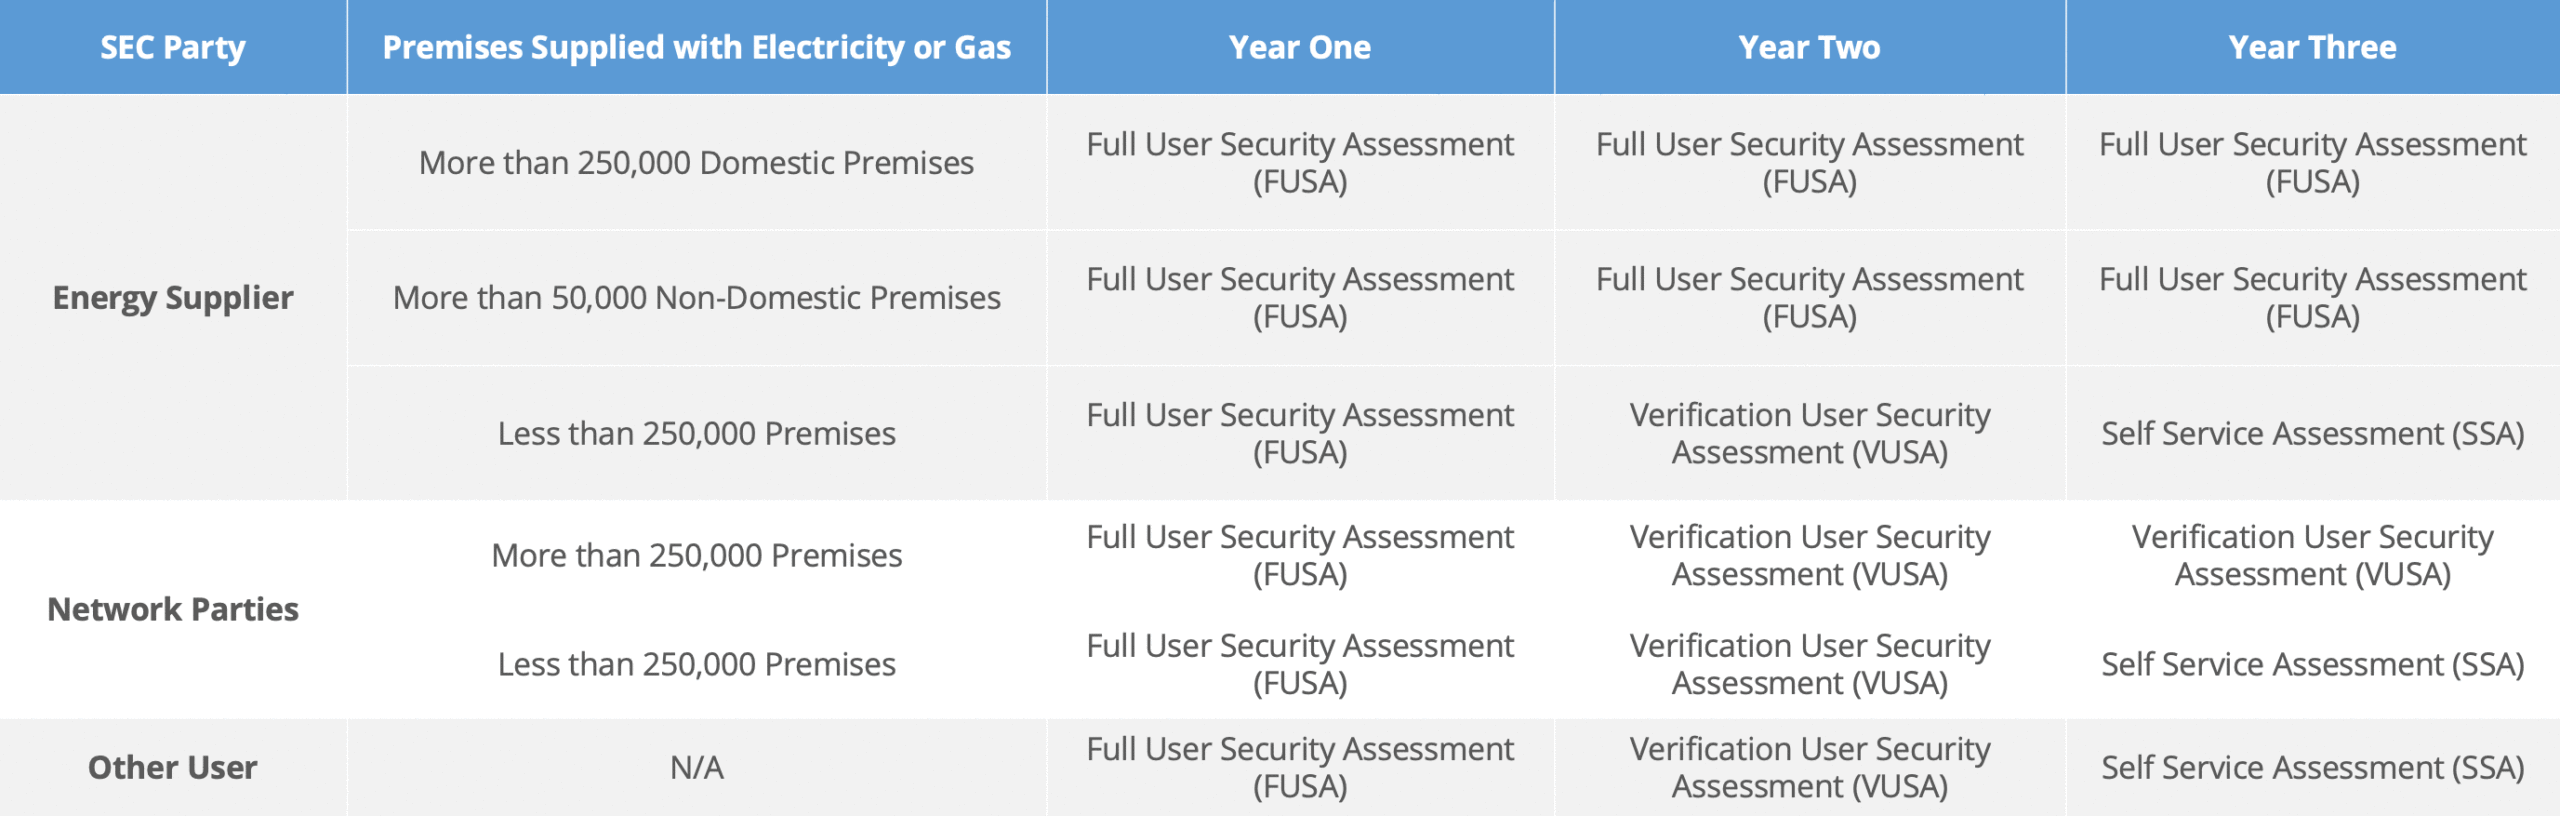 User CIO Assessments - Preparation the Security Key